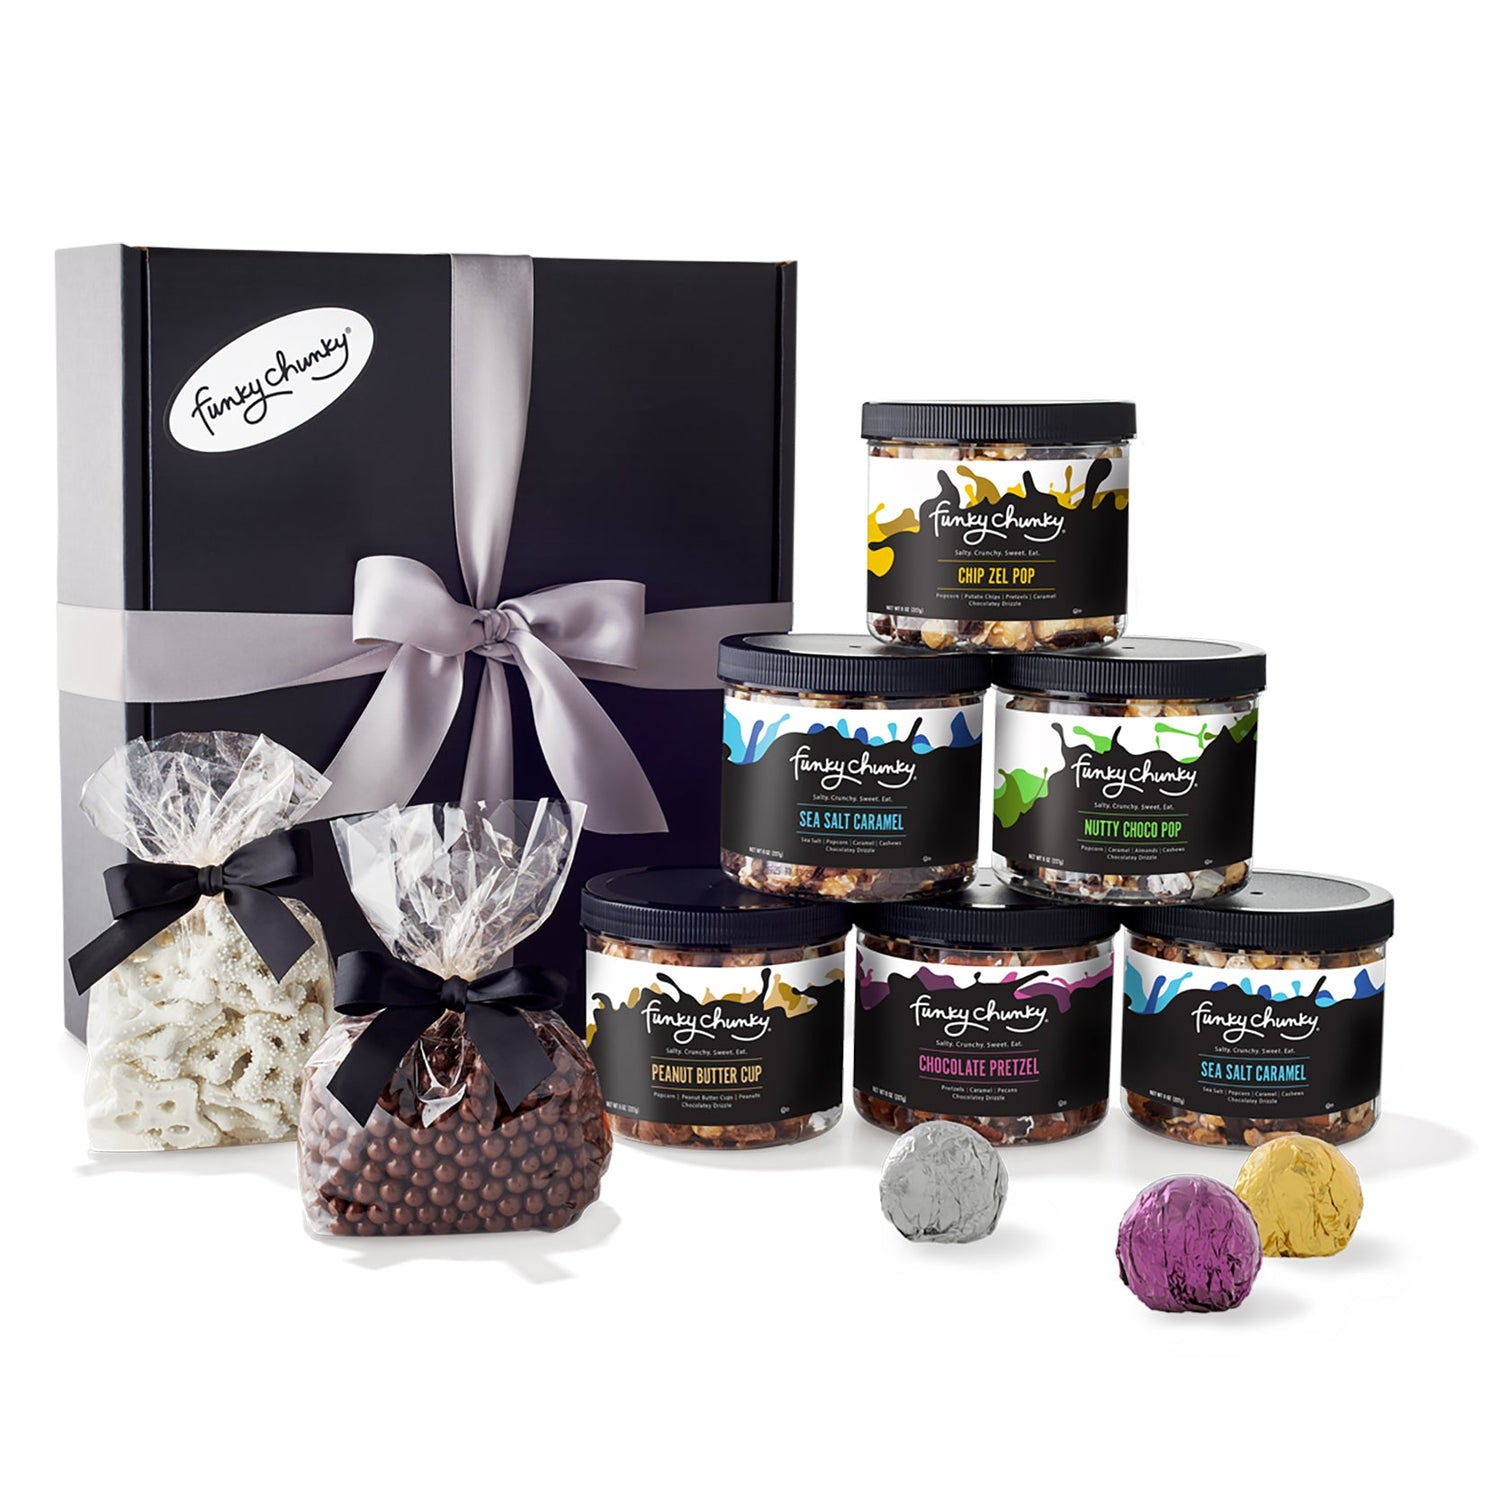 Executive Gourmet-The Executive Gourmet is a gift box filled with 6 mini canisters of Nutty Choco Pop, Chip Zel Pop, Sea Salt Caramel, Peanut Butter Cup and Chocolate Pretzel PLUS 3 one-pound bags of gourmet candy. 6 lbs.-Funky Chunky